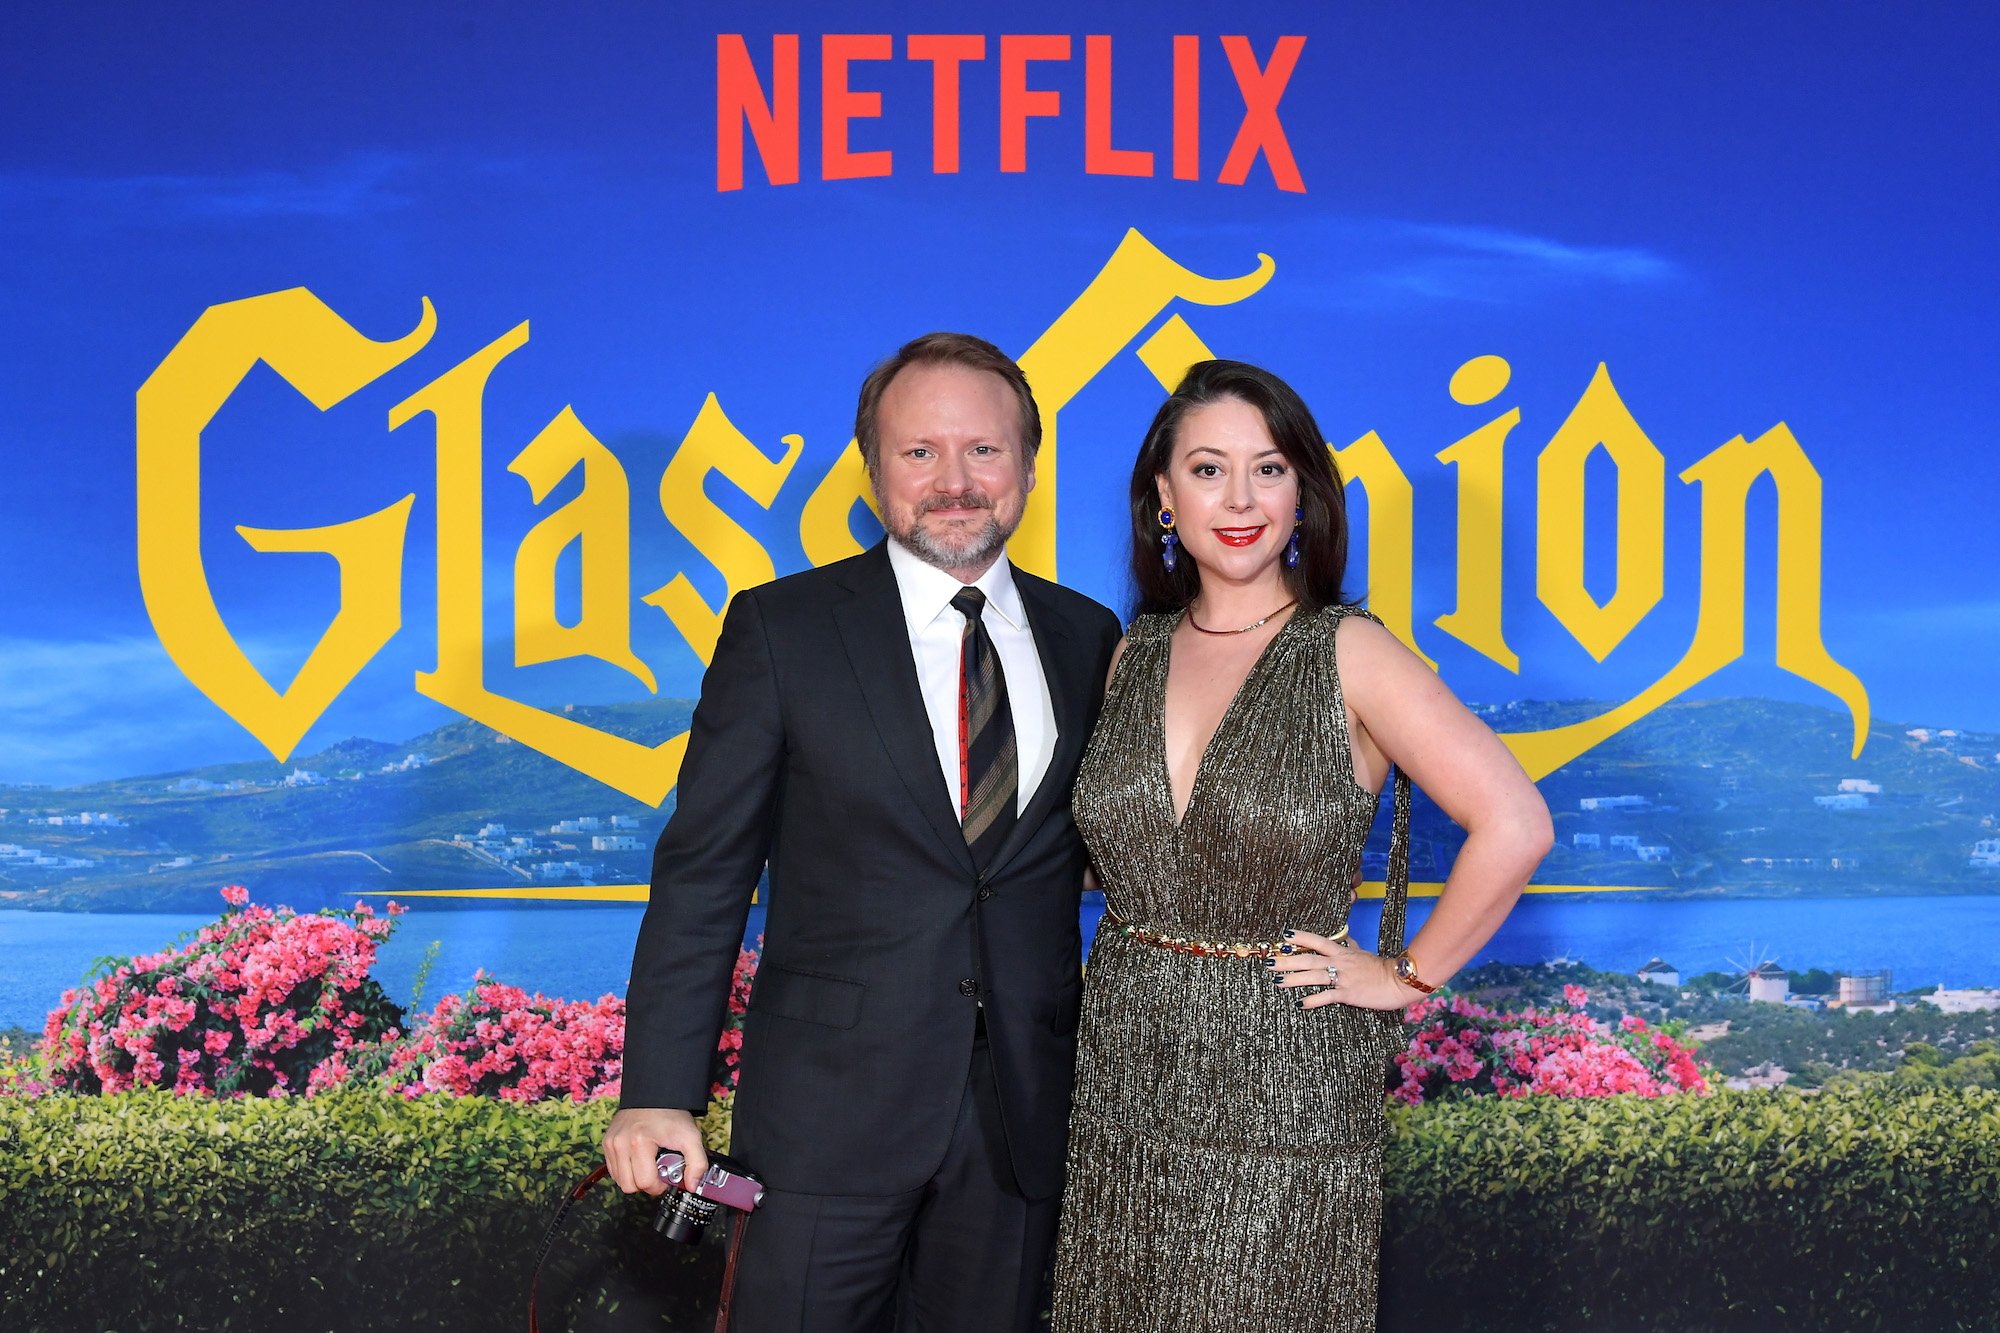 Rian Johnson and Karina Longworth attend the premiere of Glass Onion: A Knives Out Story in Los Angeles, California